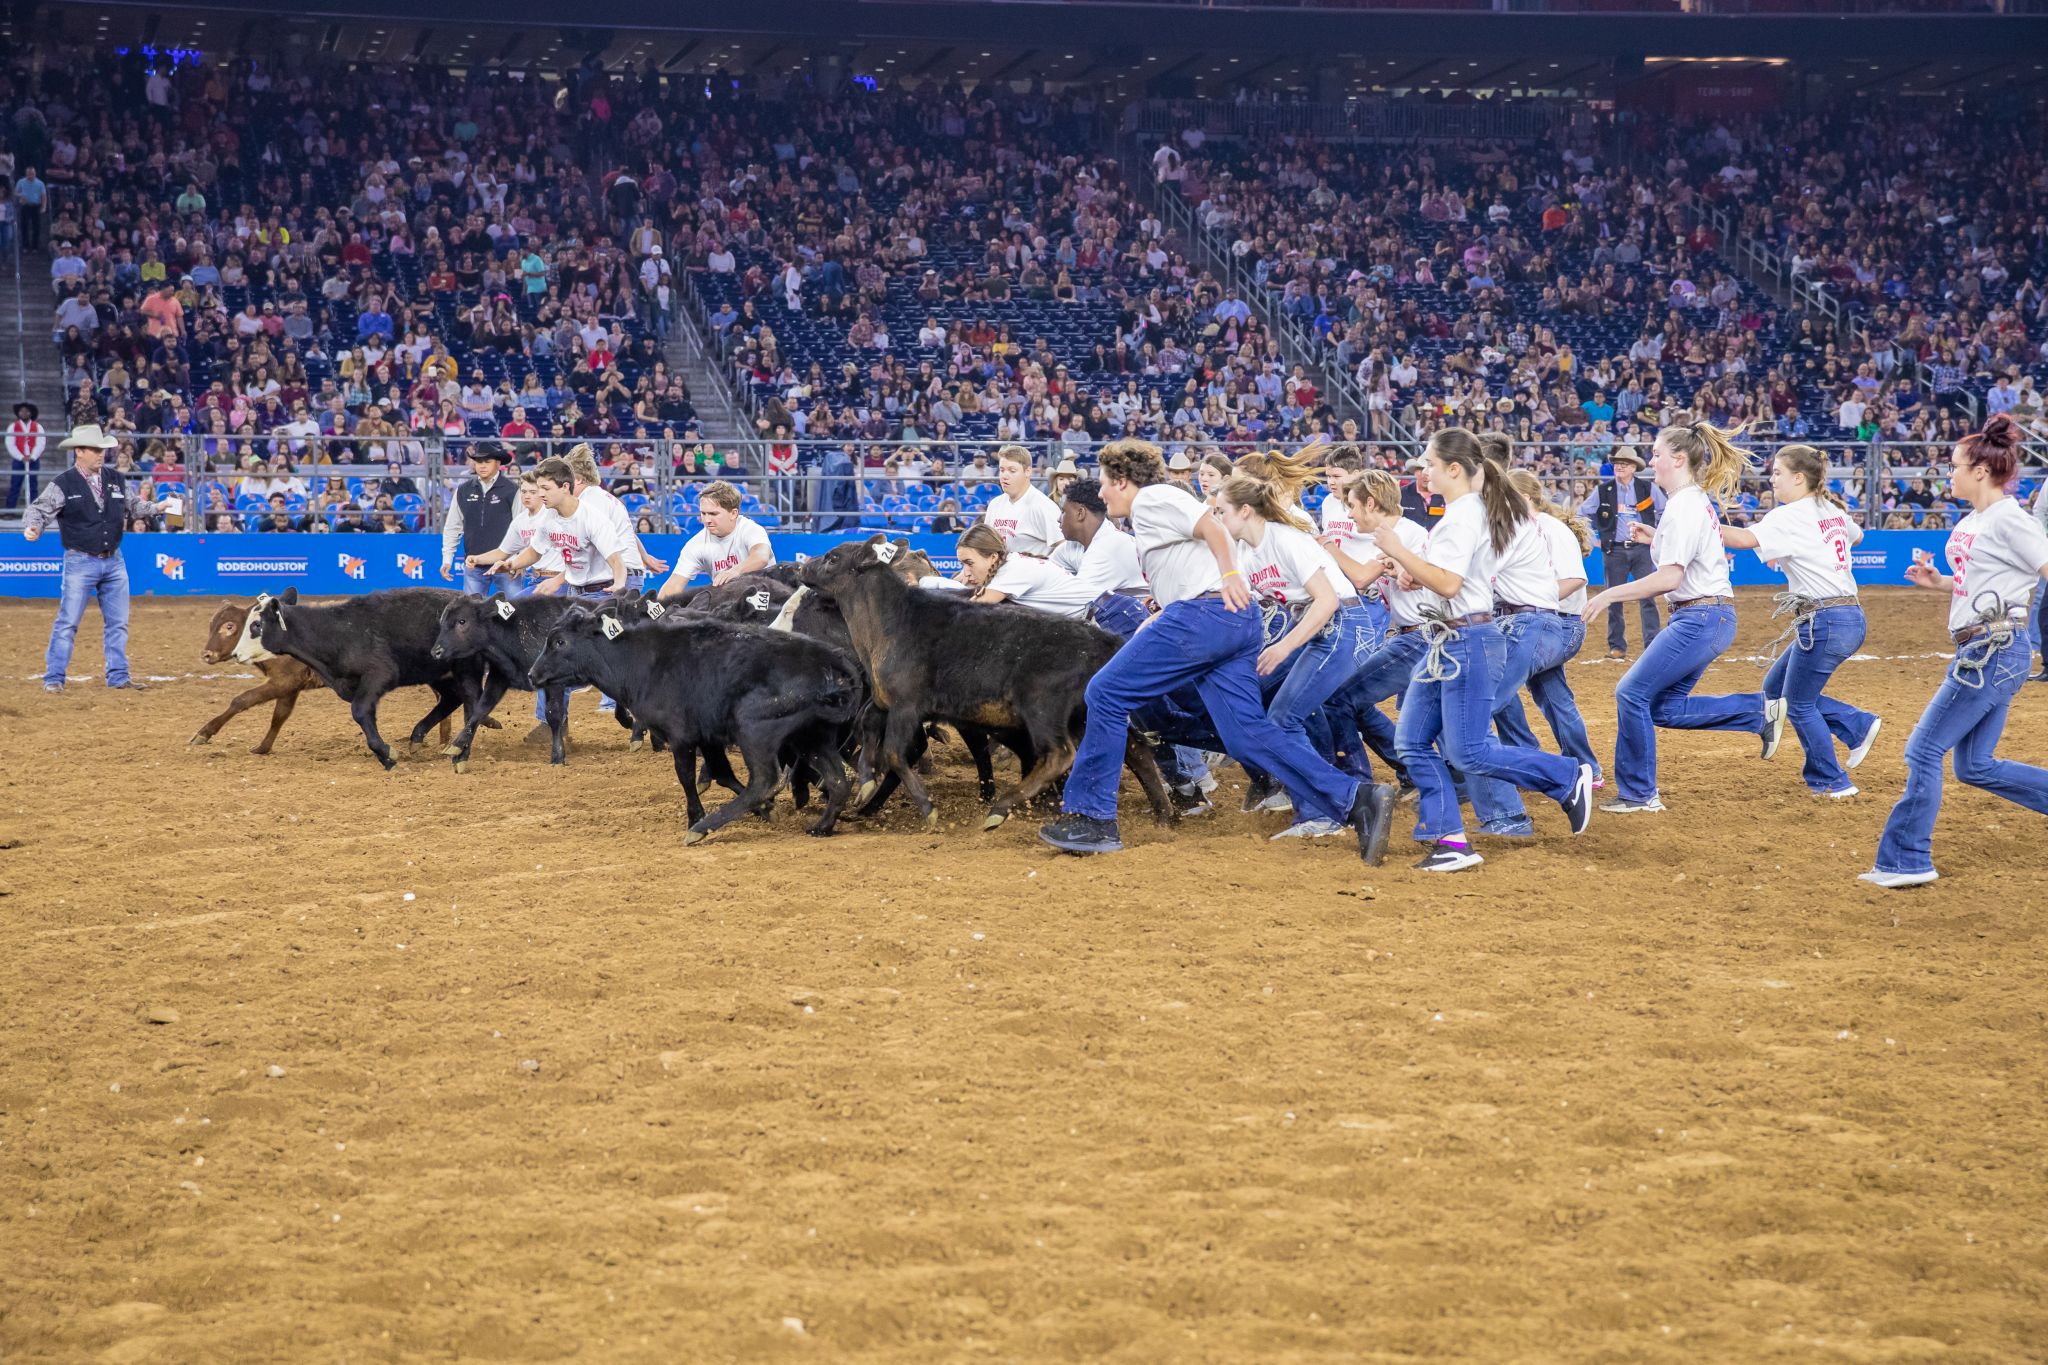 Need your RodeoHouston fix? Calfscrambling to be livestreamed this year